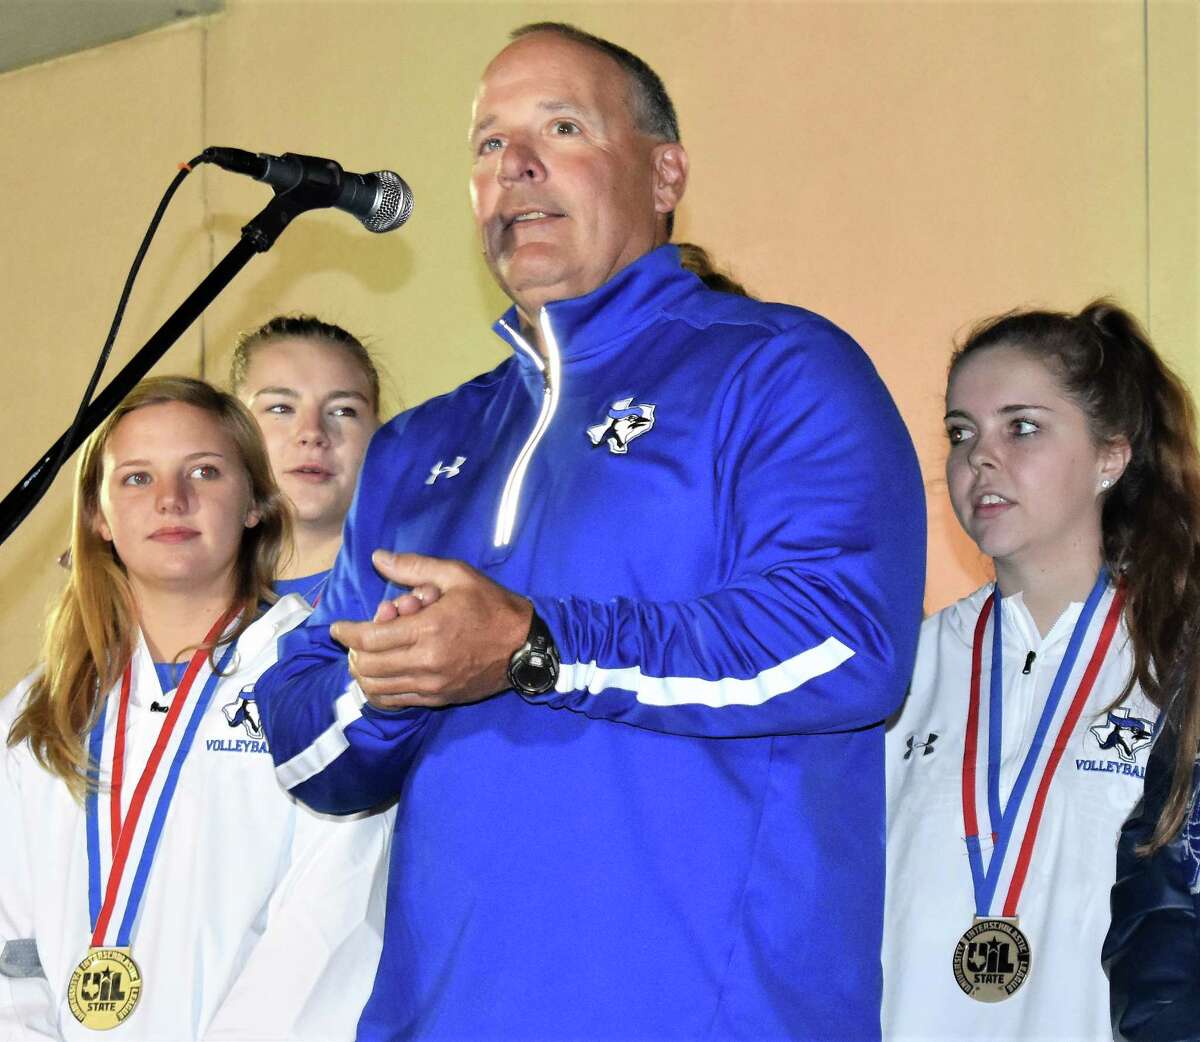 Needville ISD Superintendent Curtis Rhodes, shown here in a file photo, has warned students the will be suspended if they walk out of school or otherwise protest.